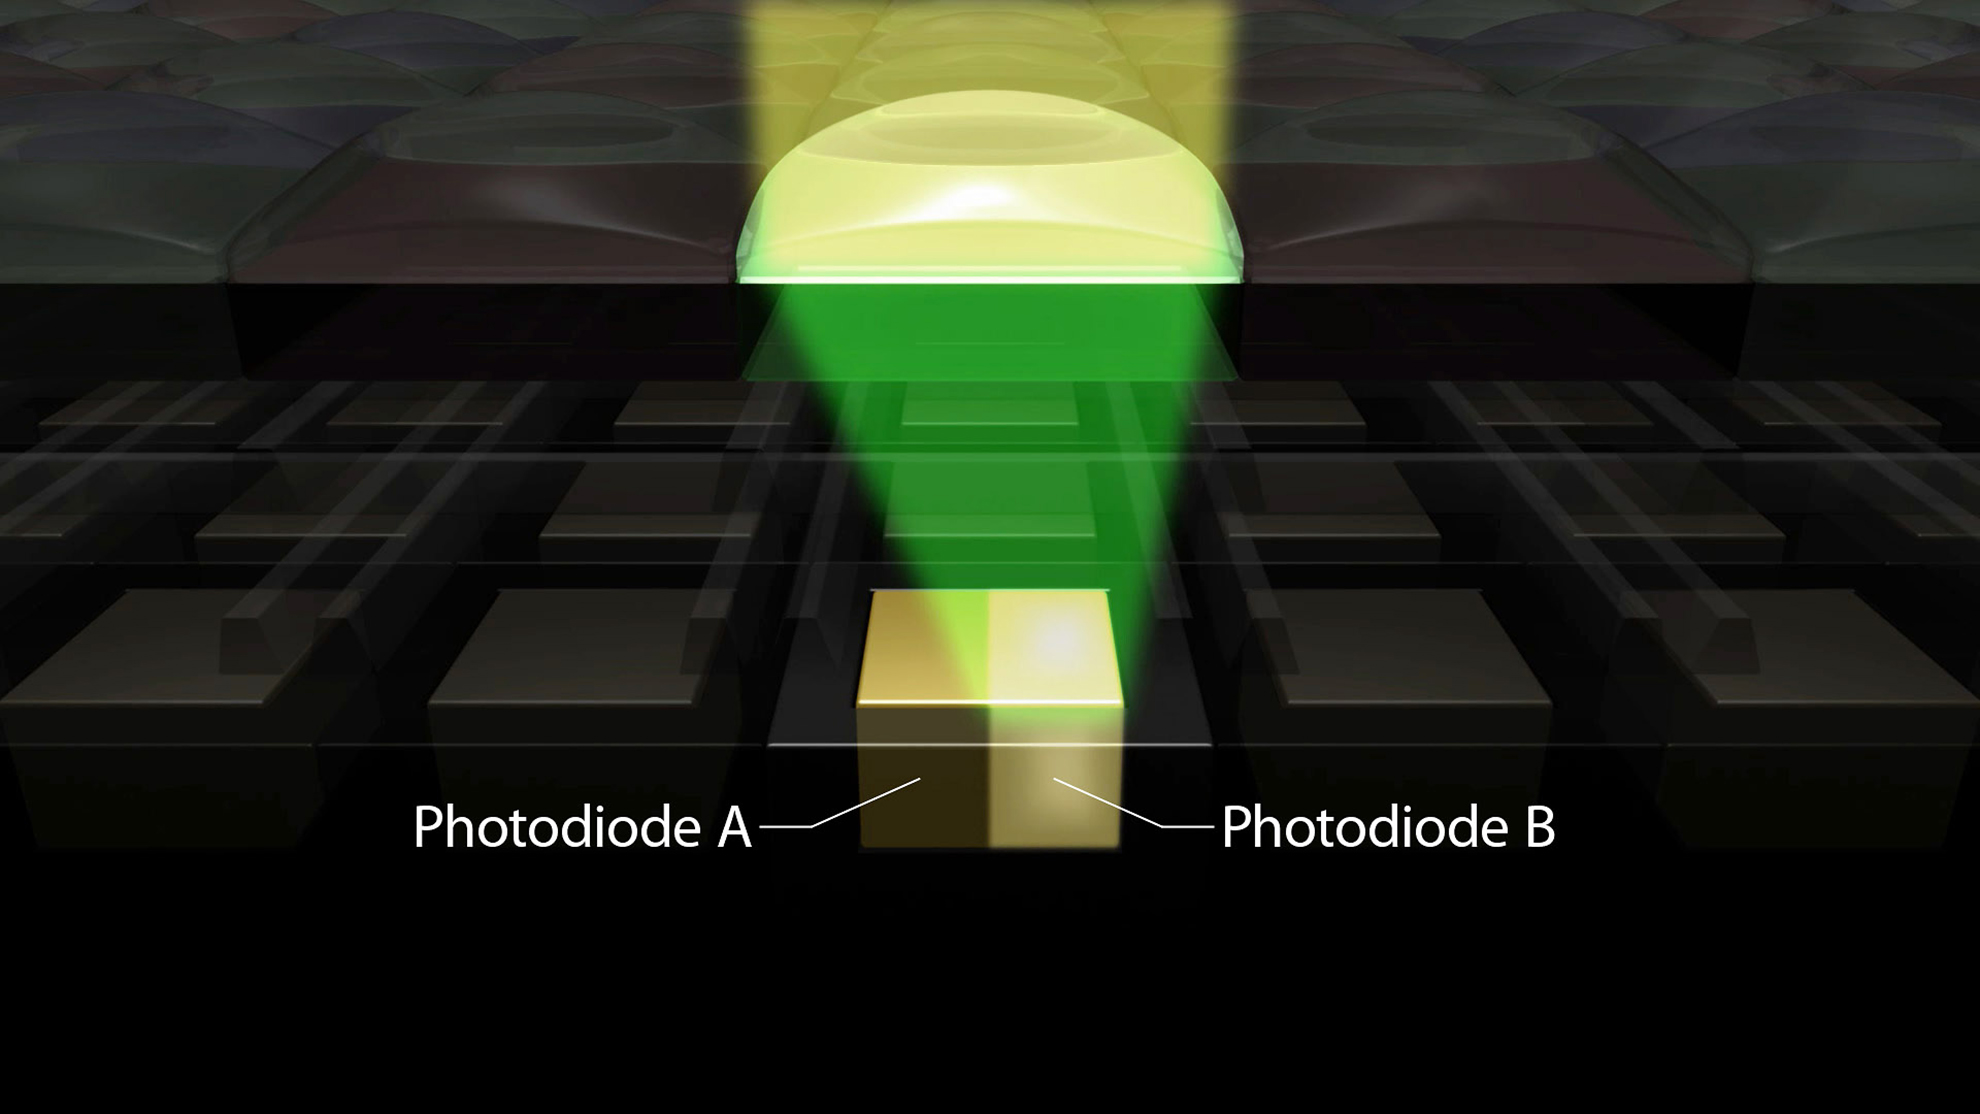 Each light-sensitive side of a pixel can be independently controlled